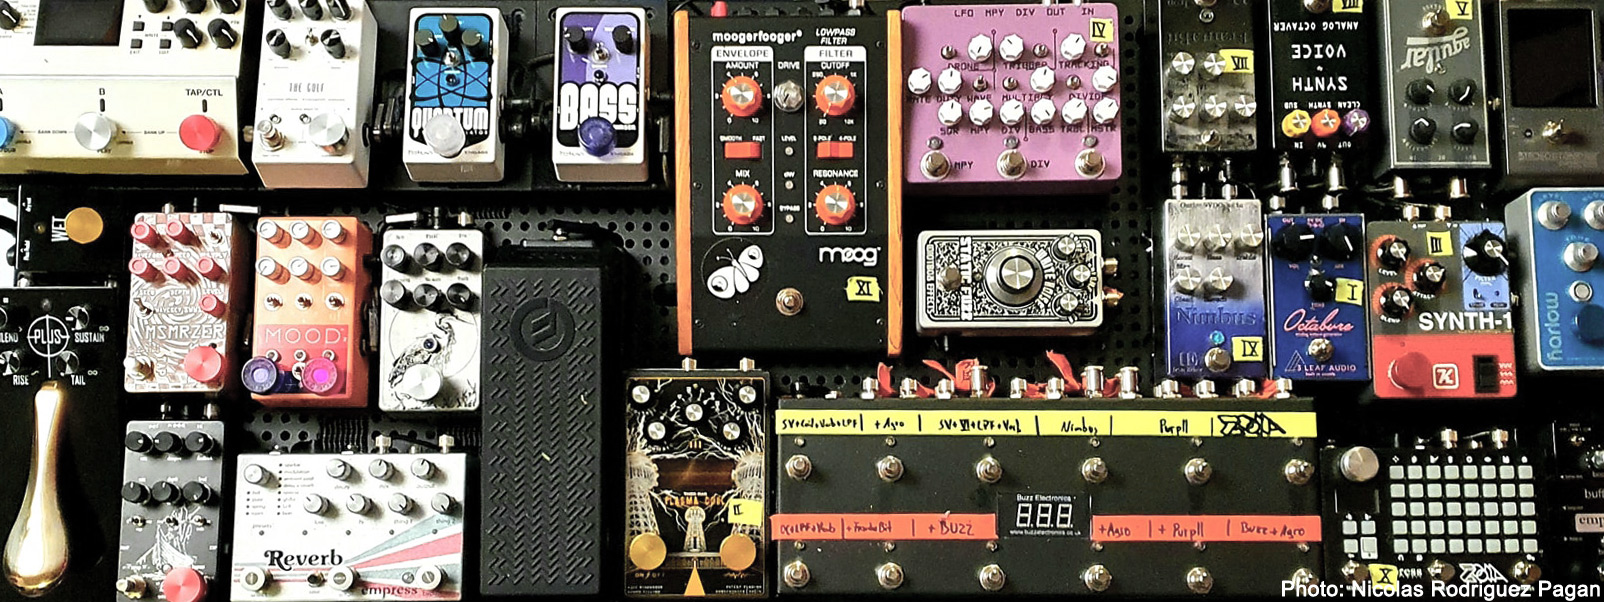 pedalboard, pedal, strom, current draw